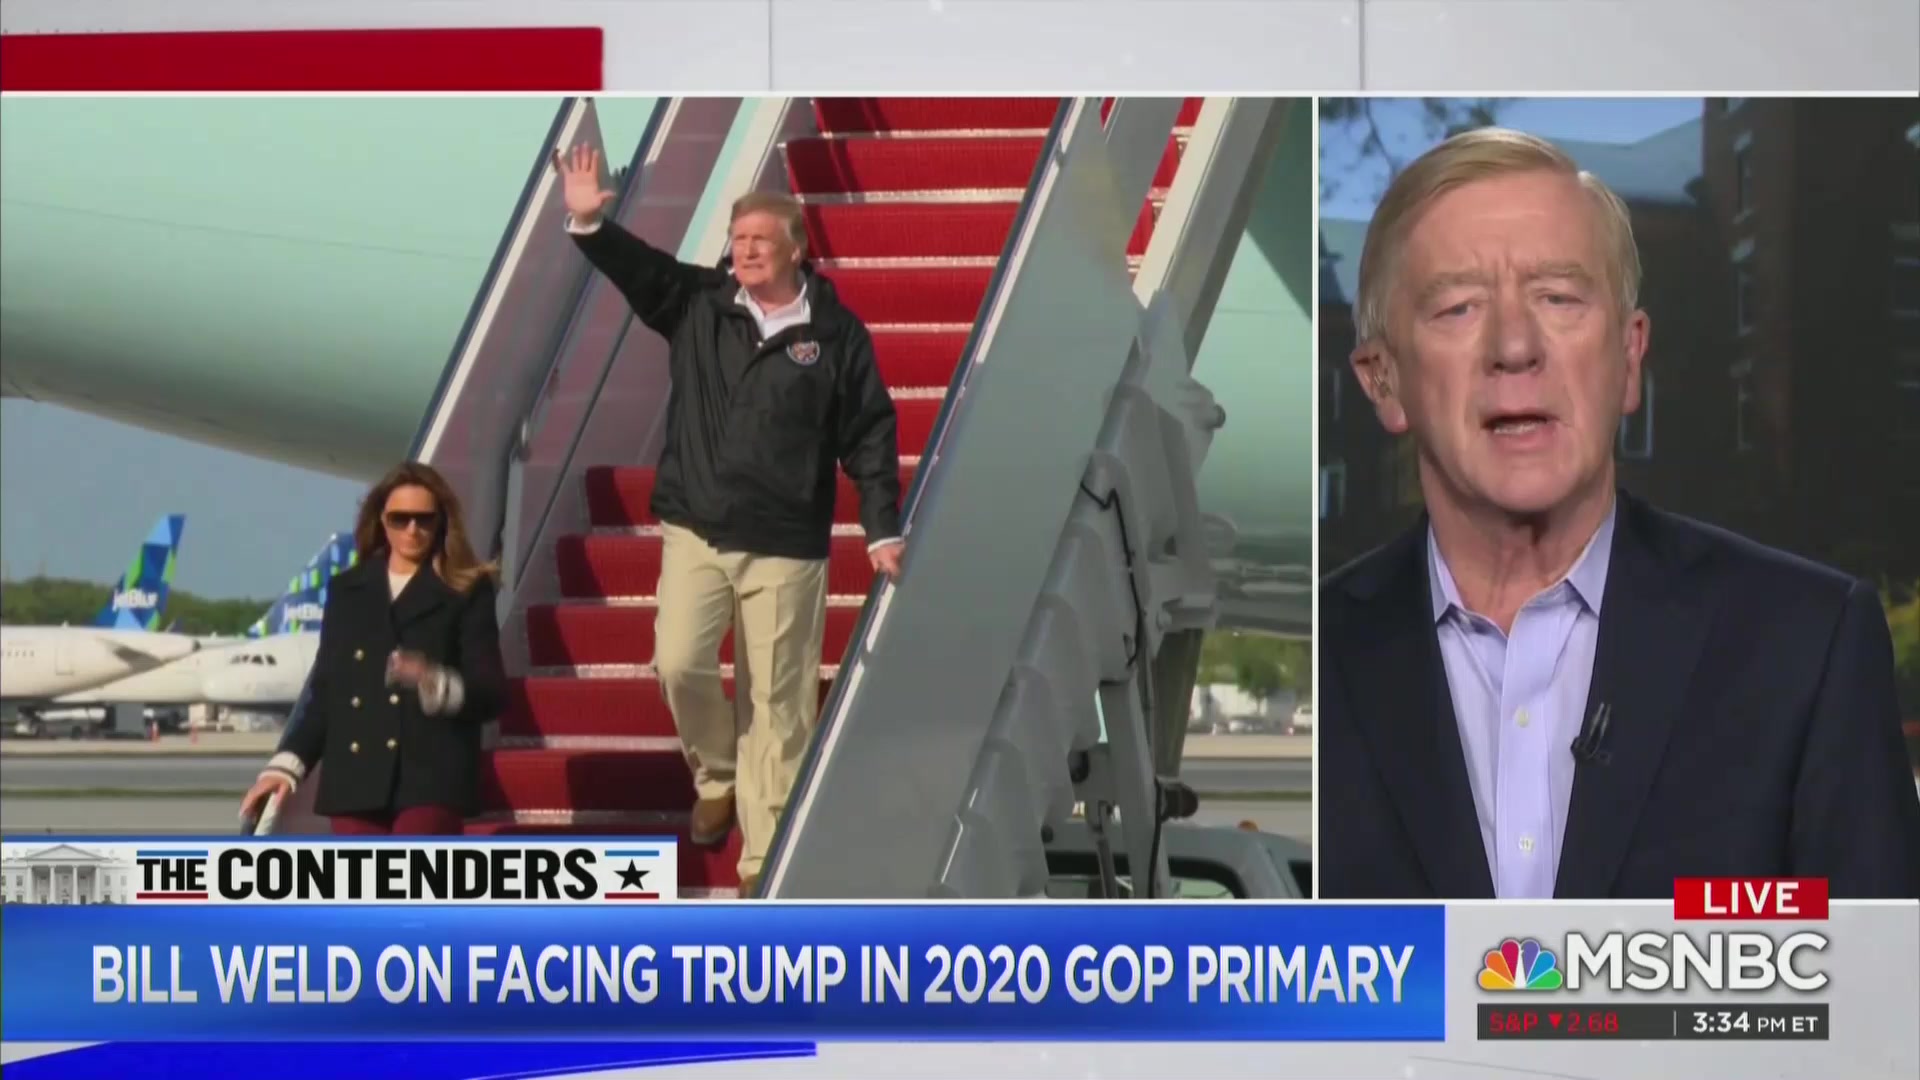 Bill Weld: Only Thing I Have in Common With Trump Is We’re Both ‘Big Orange Men’